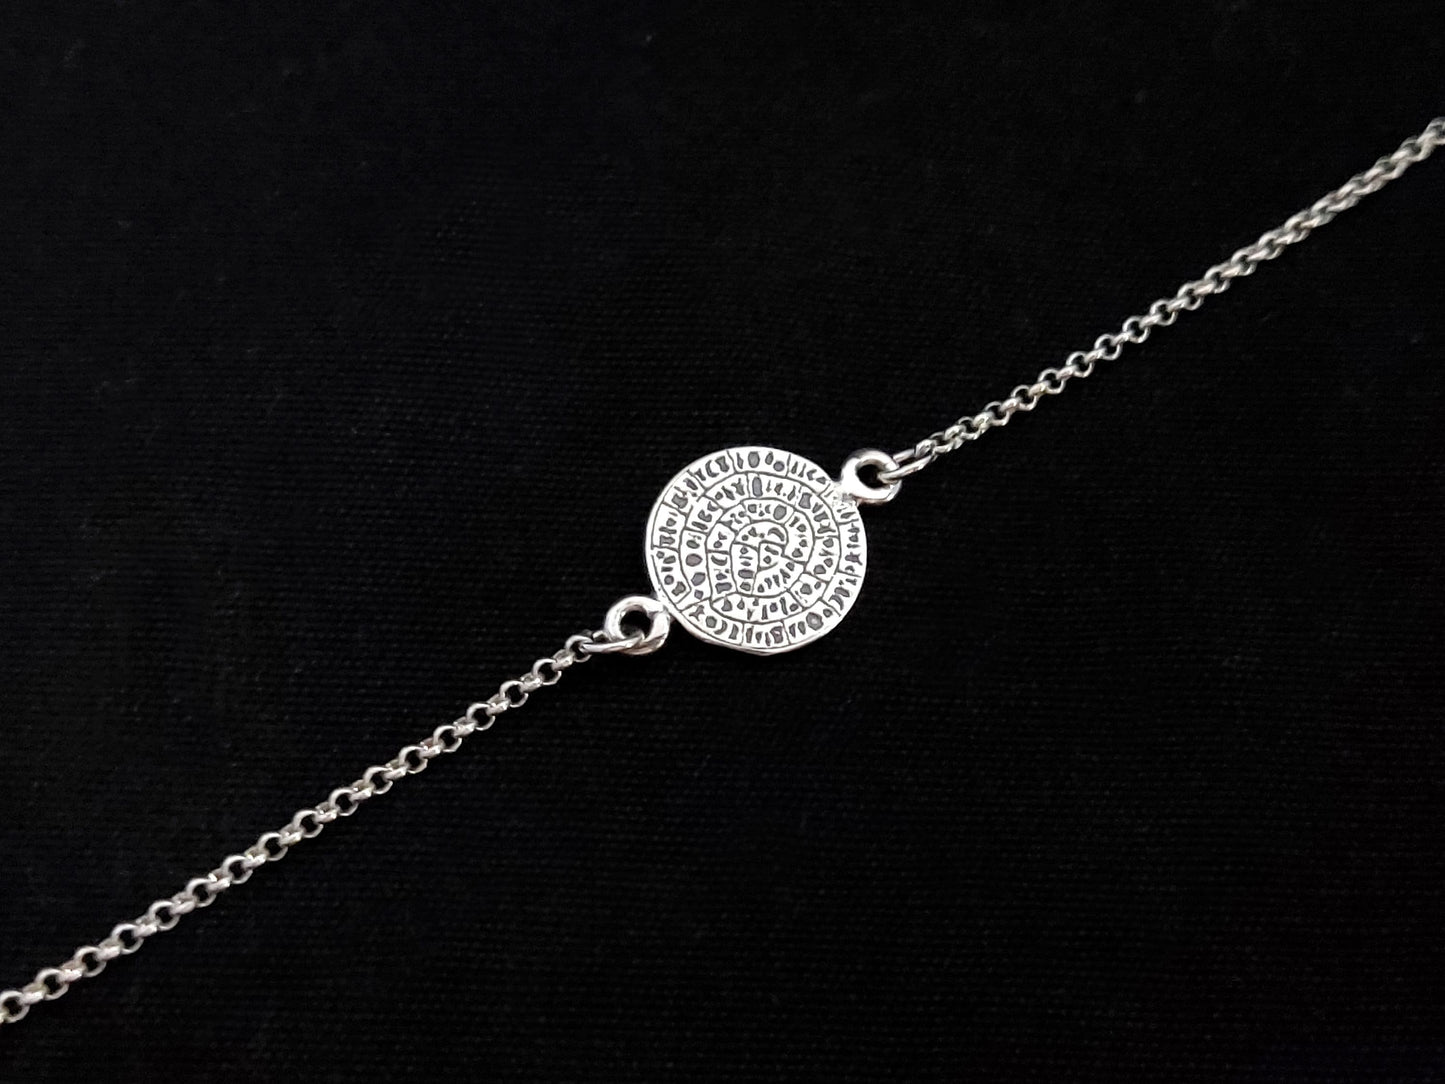 Sterling Silver 925 adjustable bracelet with ancient Greek Minoan Phaistos Disc as centerpiece. Bracelet adjustable from 17-20 cm, 6.63-7.80 inches and 2 mm wide. Disc measures 10 mm in diameter. Hallmarked 925, made in Greece. Free Shipping Included.